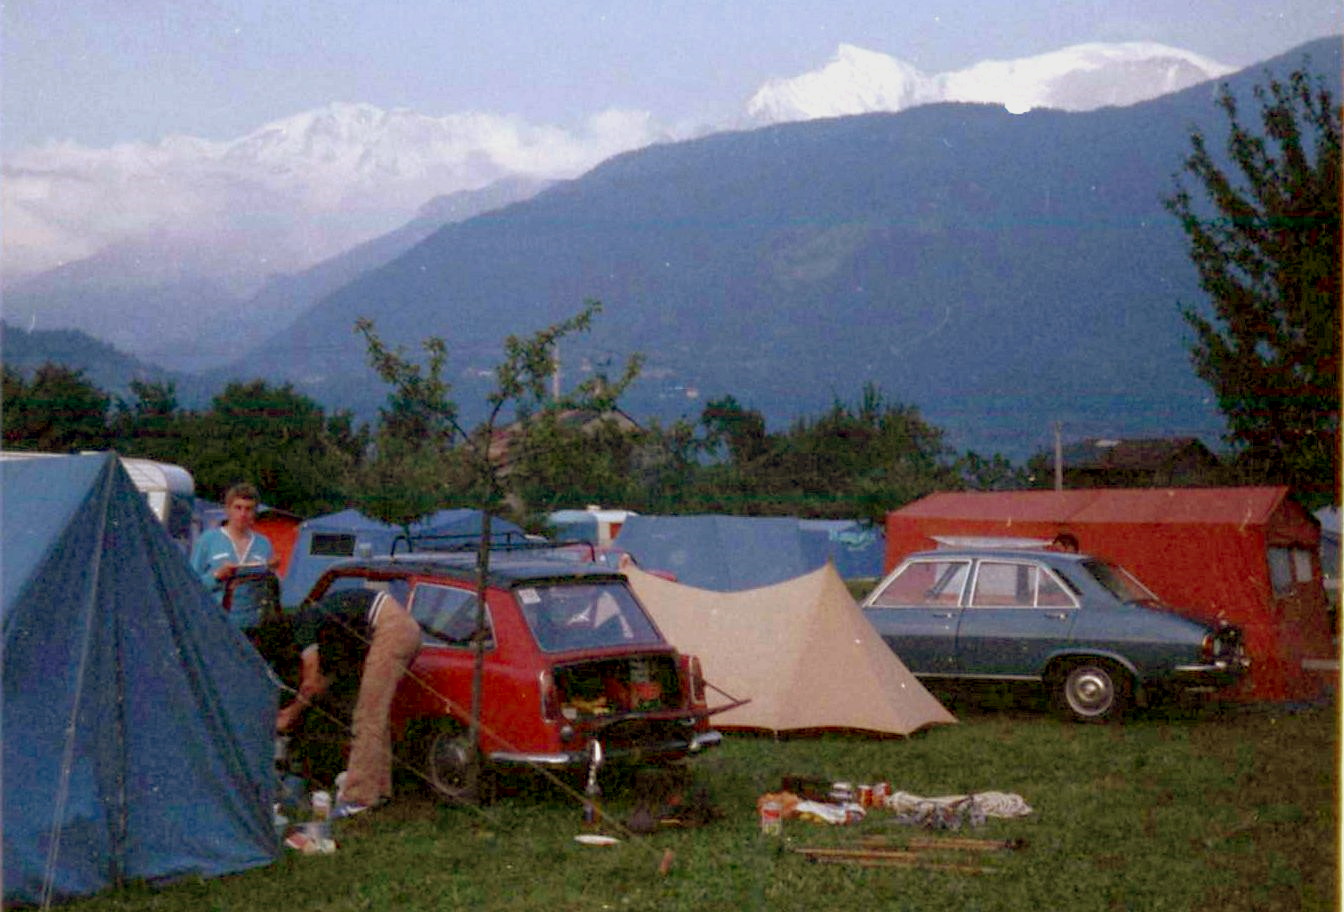 Campsite in Chamonix Valley in the French Alps